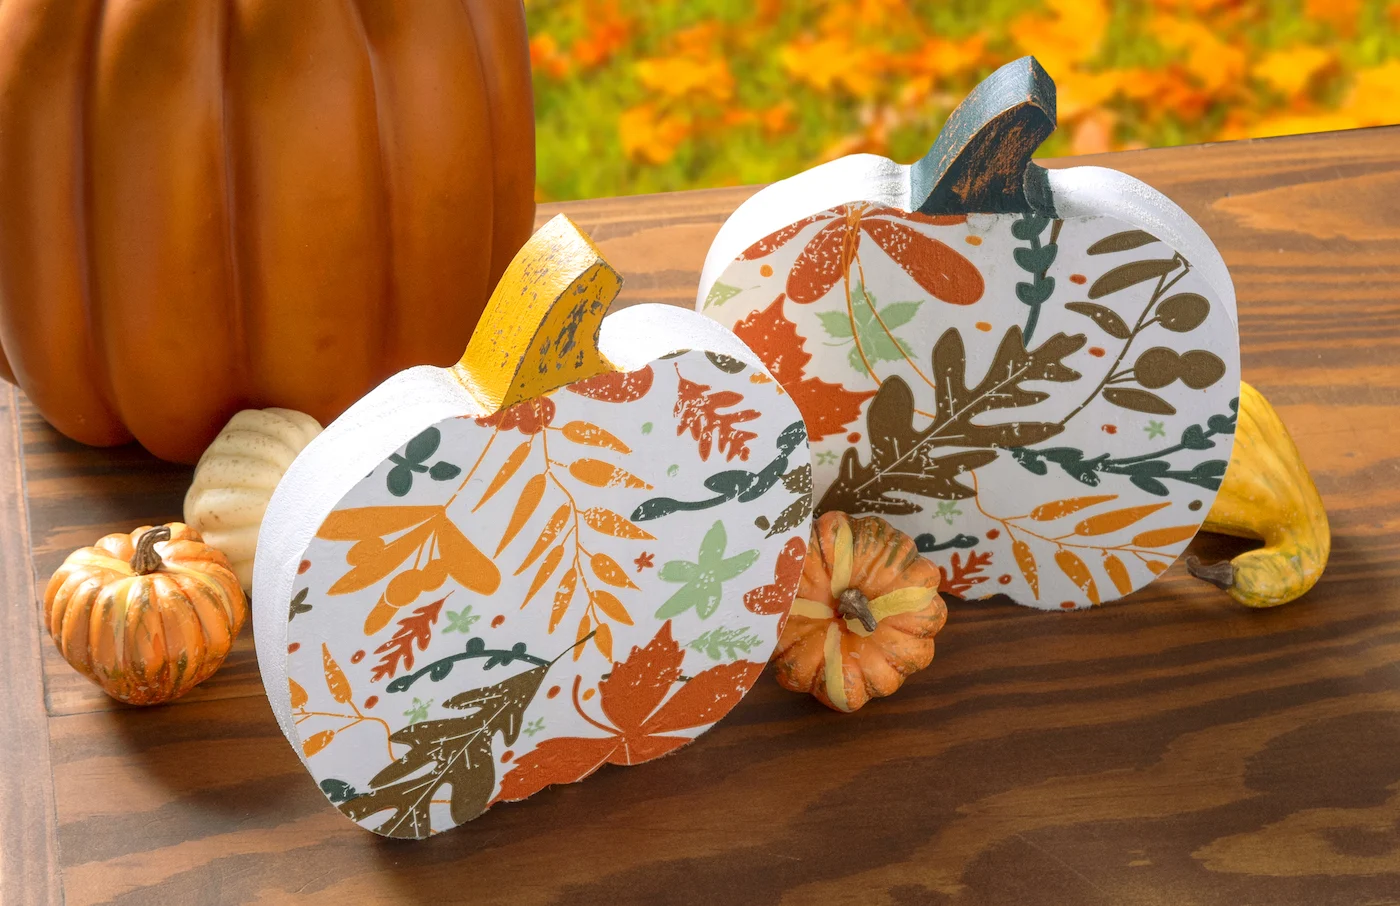 DIY wood pumpkins decorated for fall